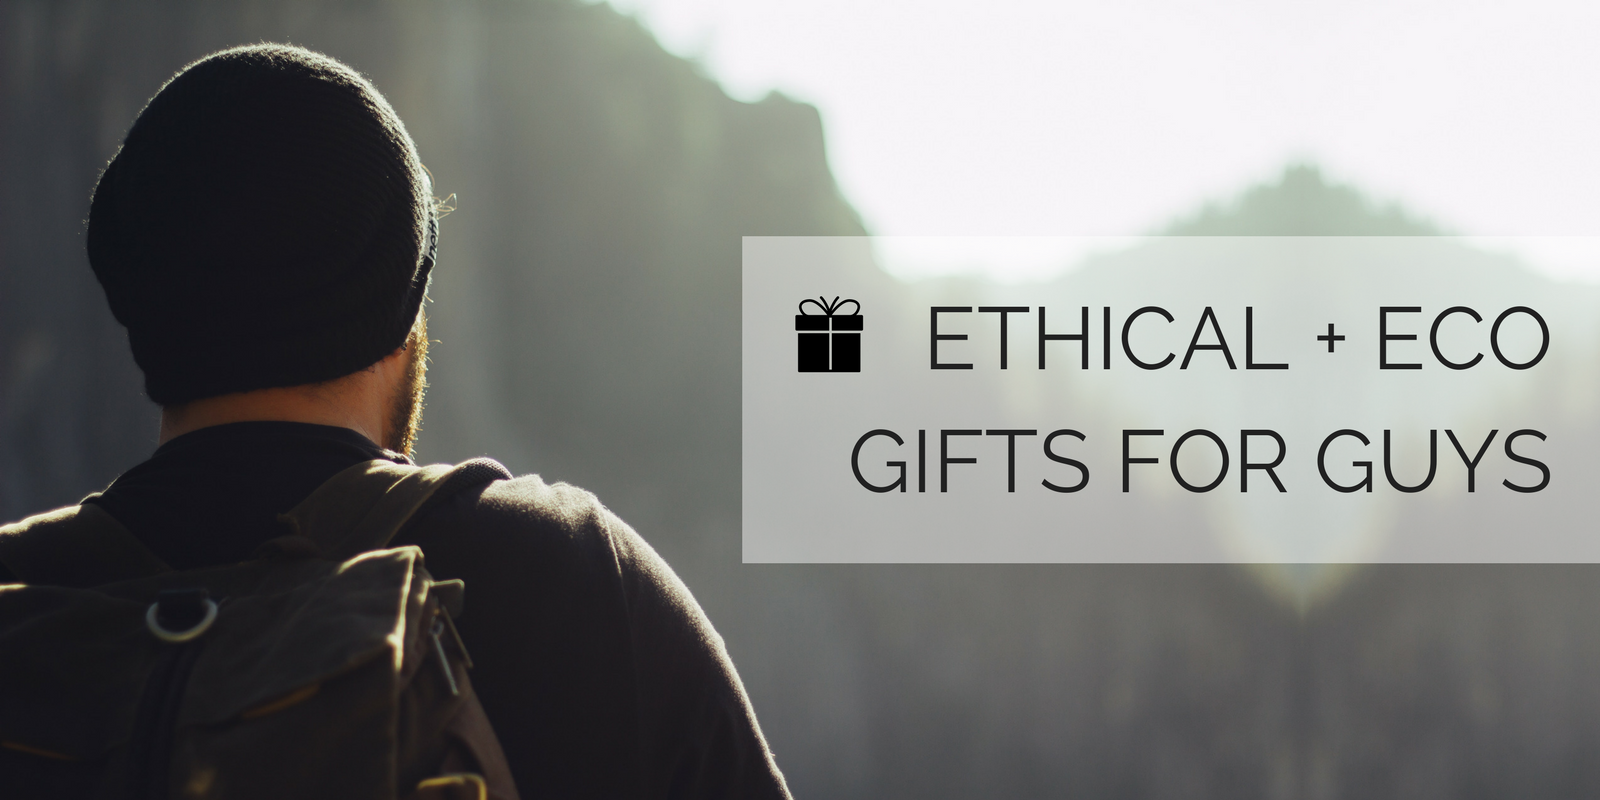 Ethical + Eco Gifts for Guys - Azura Bay edition